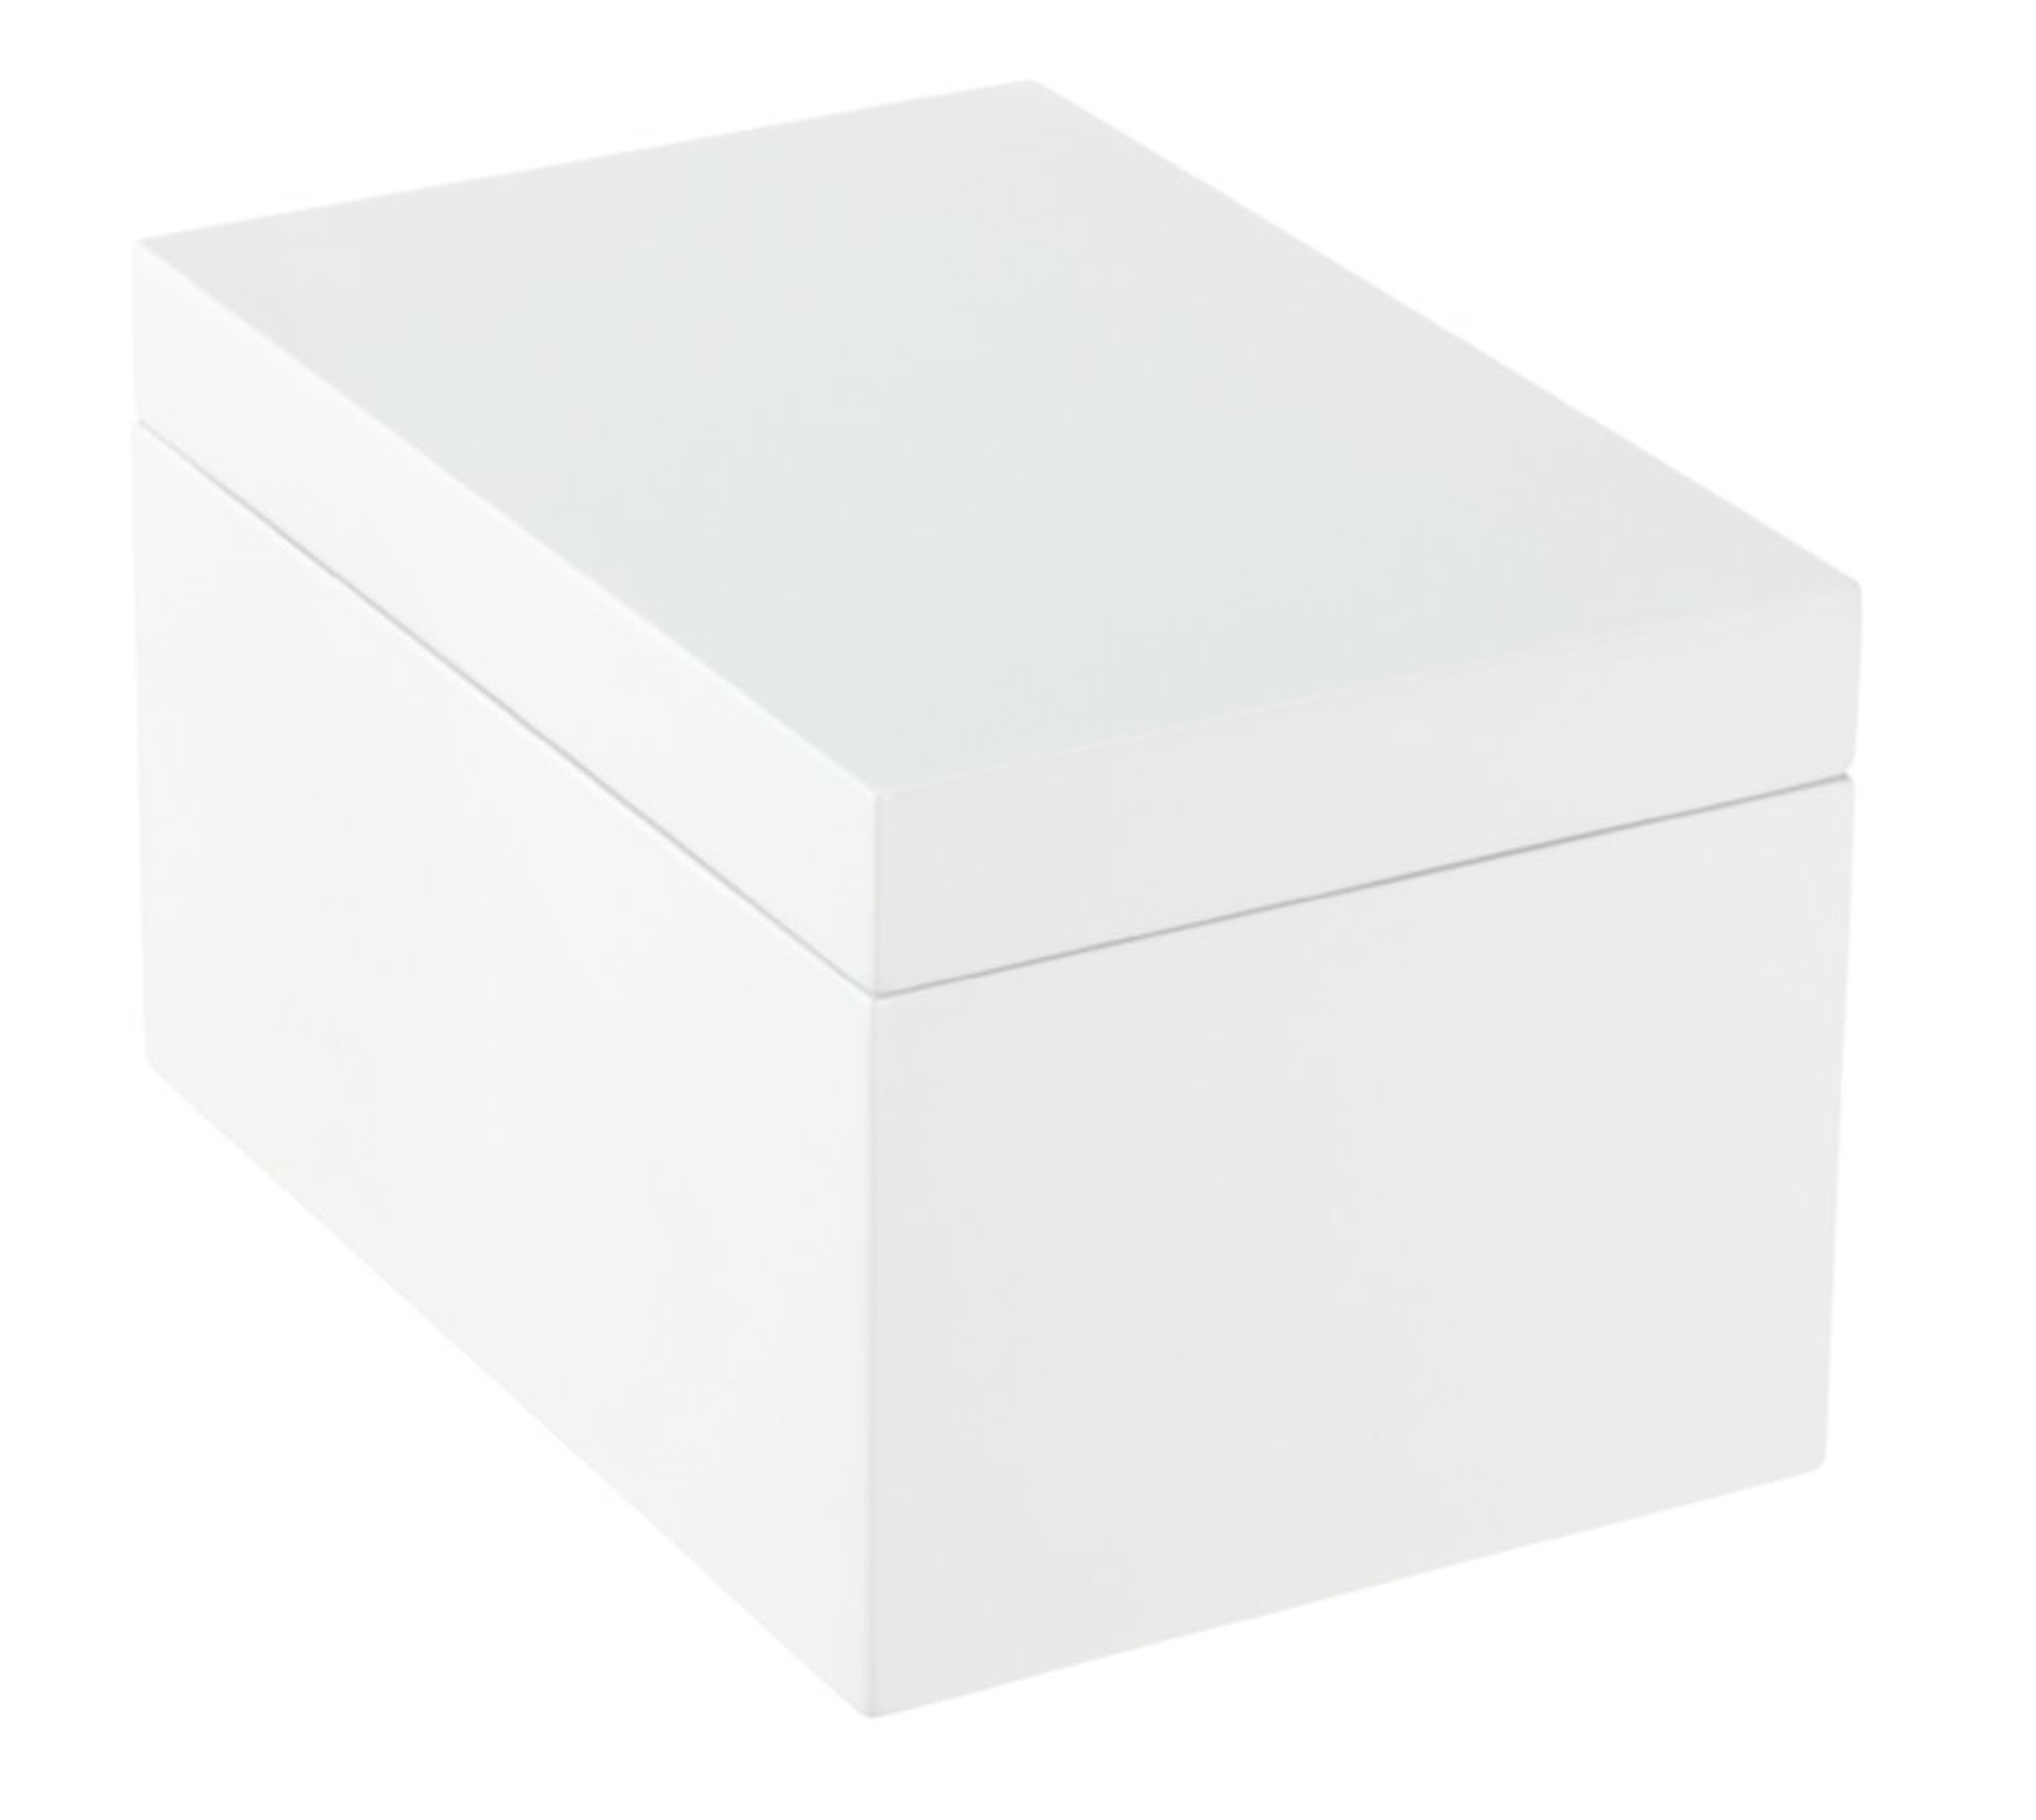 Large Lacquered Rectangular Box White - containerstore.com